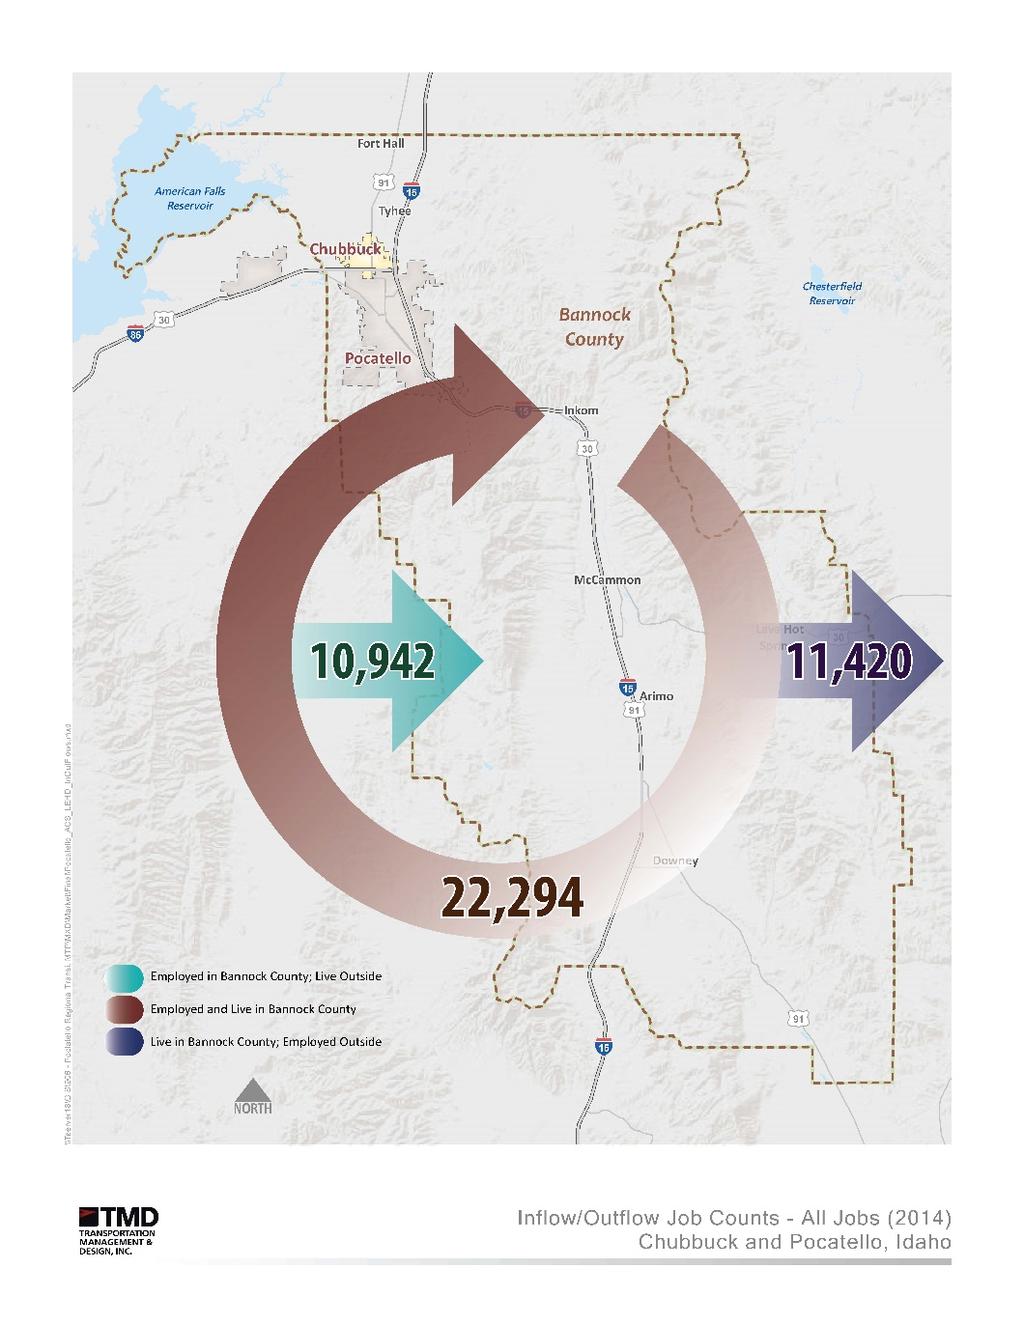 Travel to Work Patterns Travel to work patterns show that activity is generally concentrated within the bounds of Bannock County, however there are also significant inflow and outflow travel patterns.